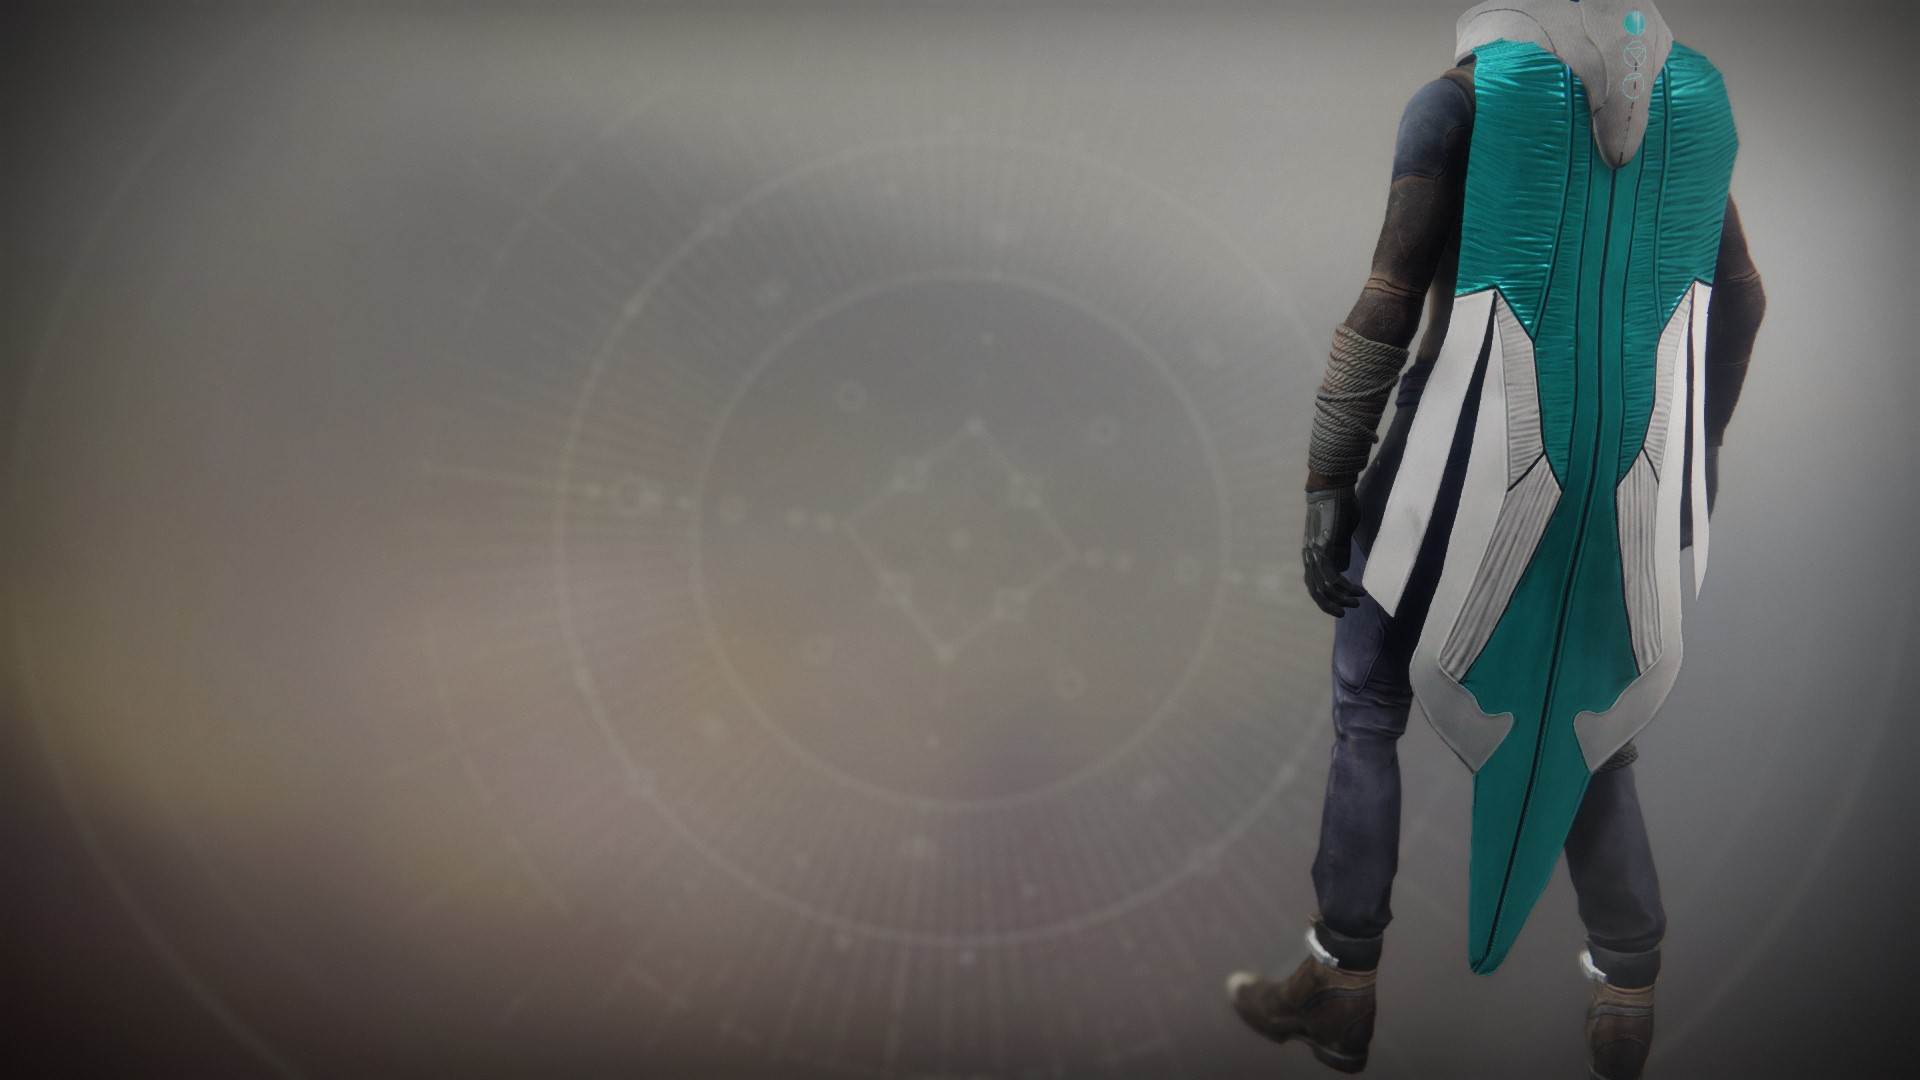 An in-game render of the Cloak Relentless.